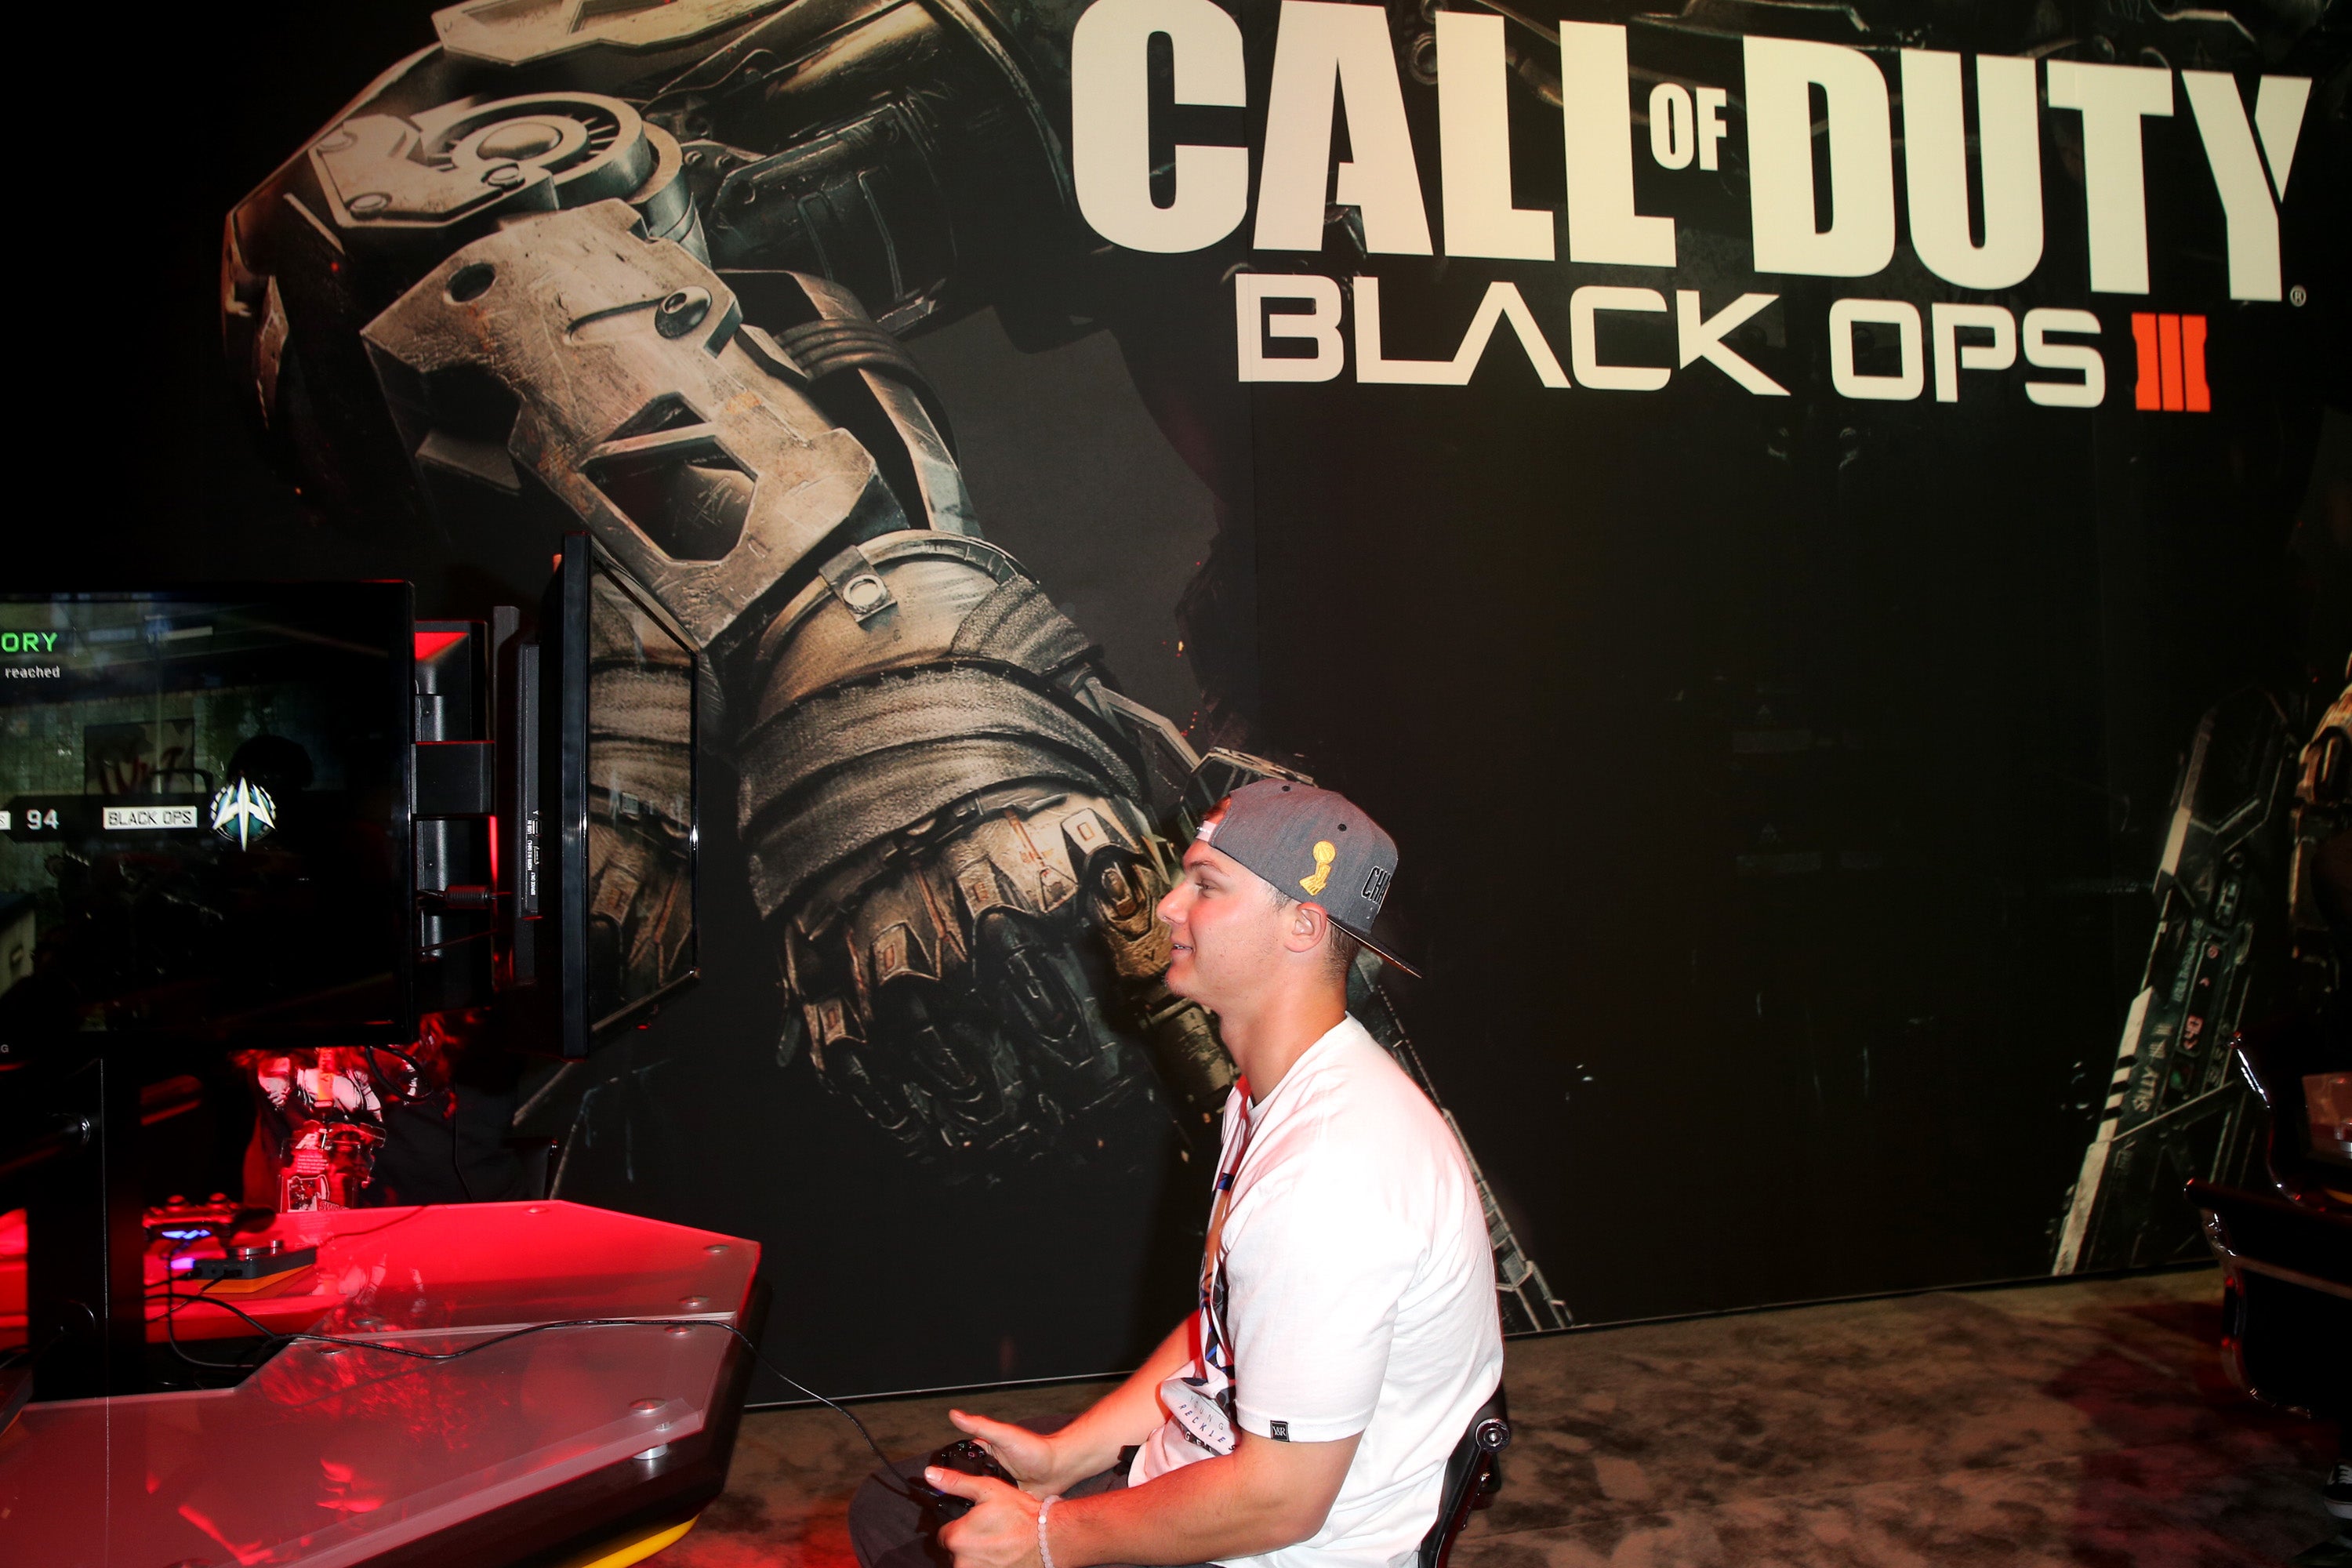 Military video game series Call of Duty has brought in over $10 billion for its publisher, Activision